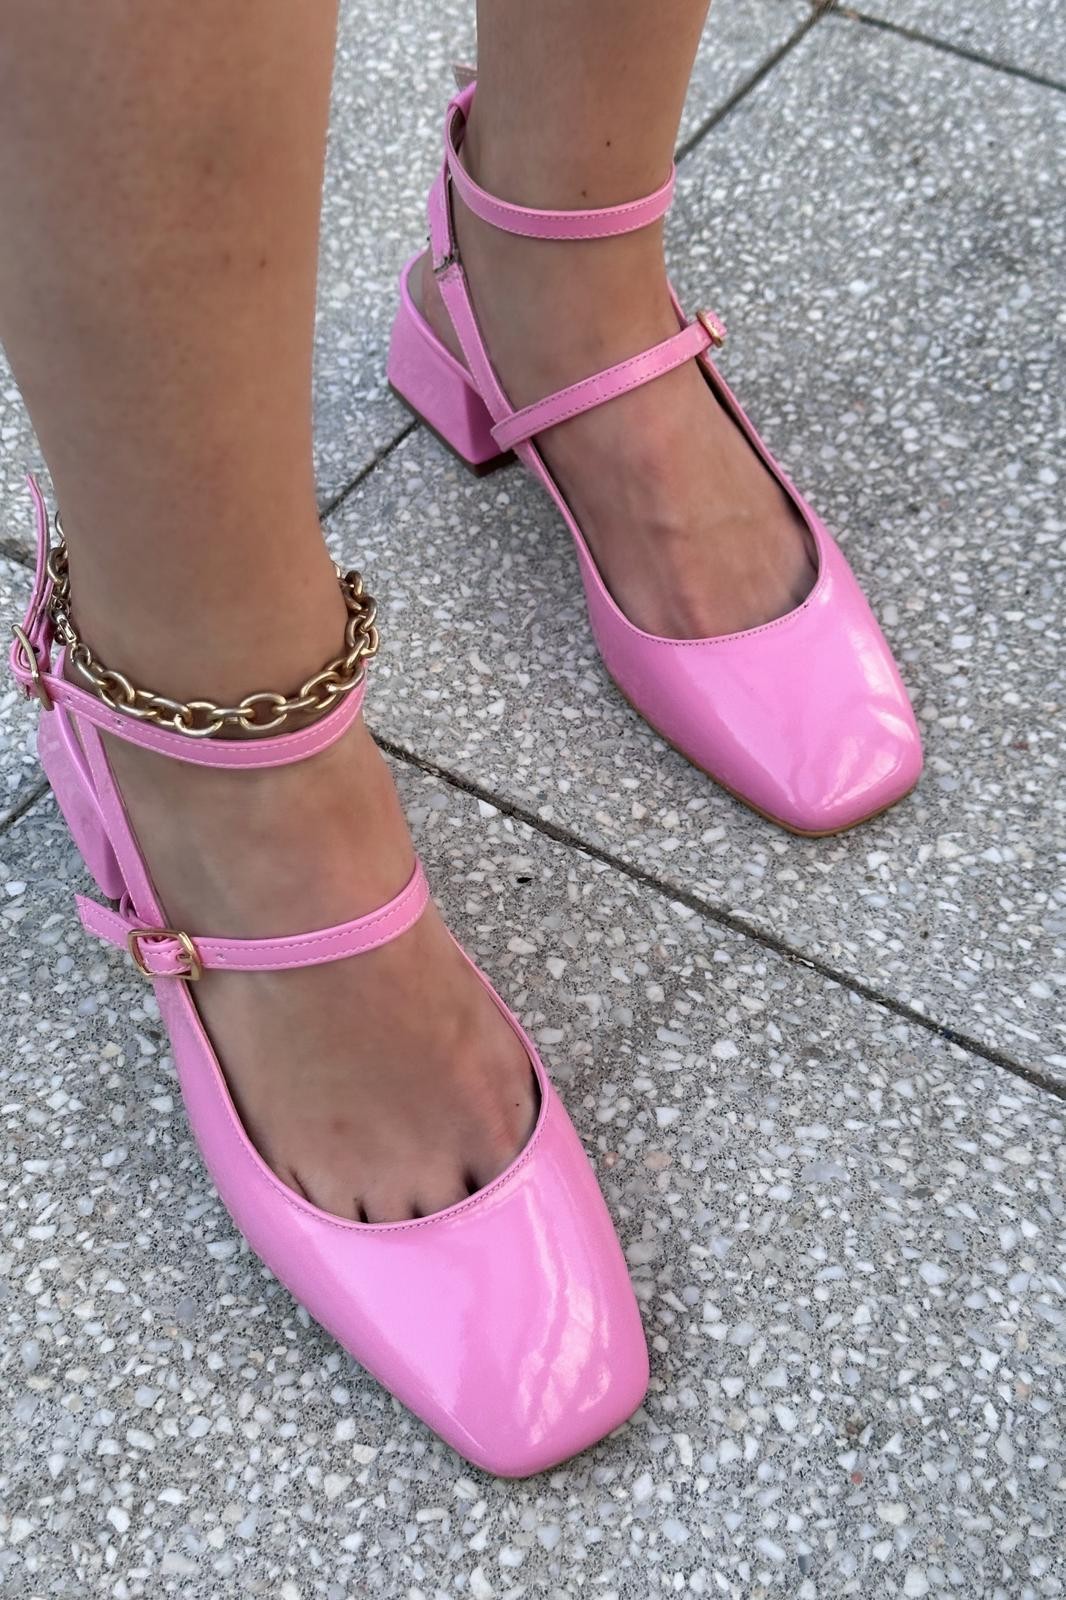 Notins Patent Leather Mary Jane Women Heels Pink Pink